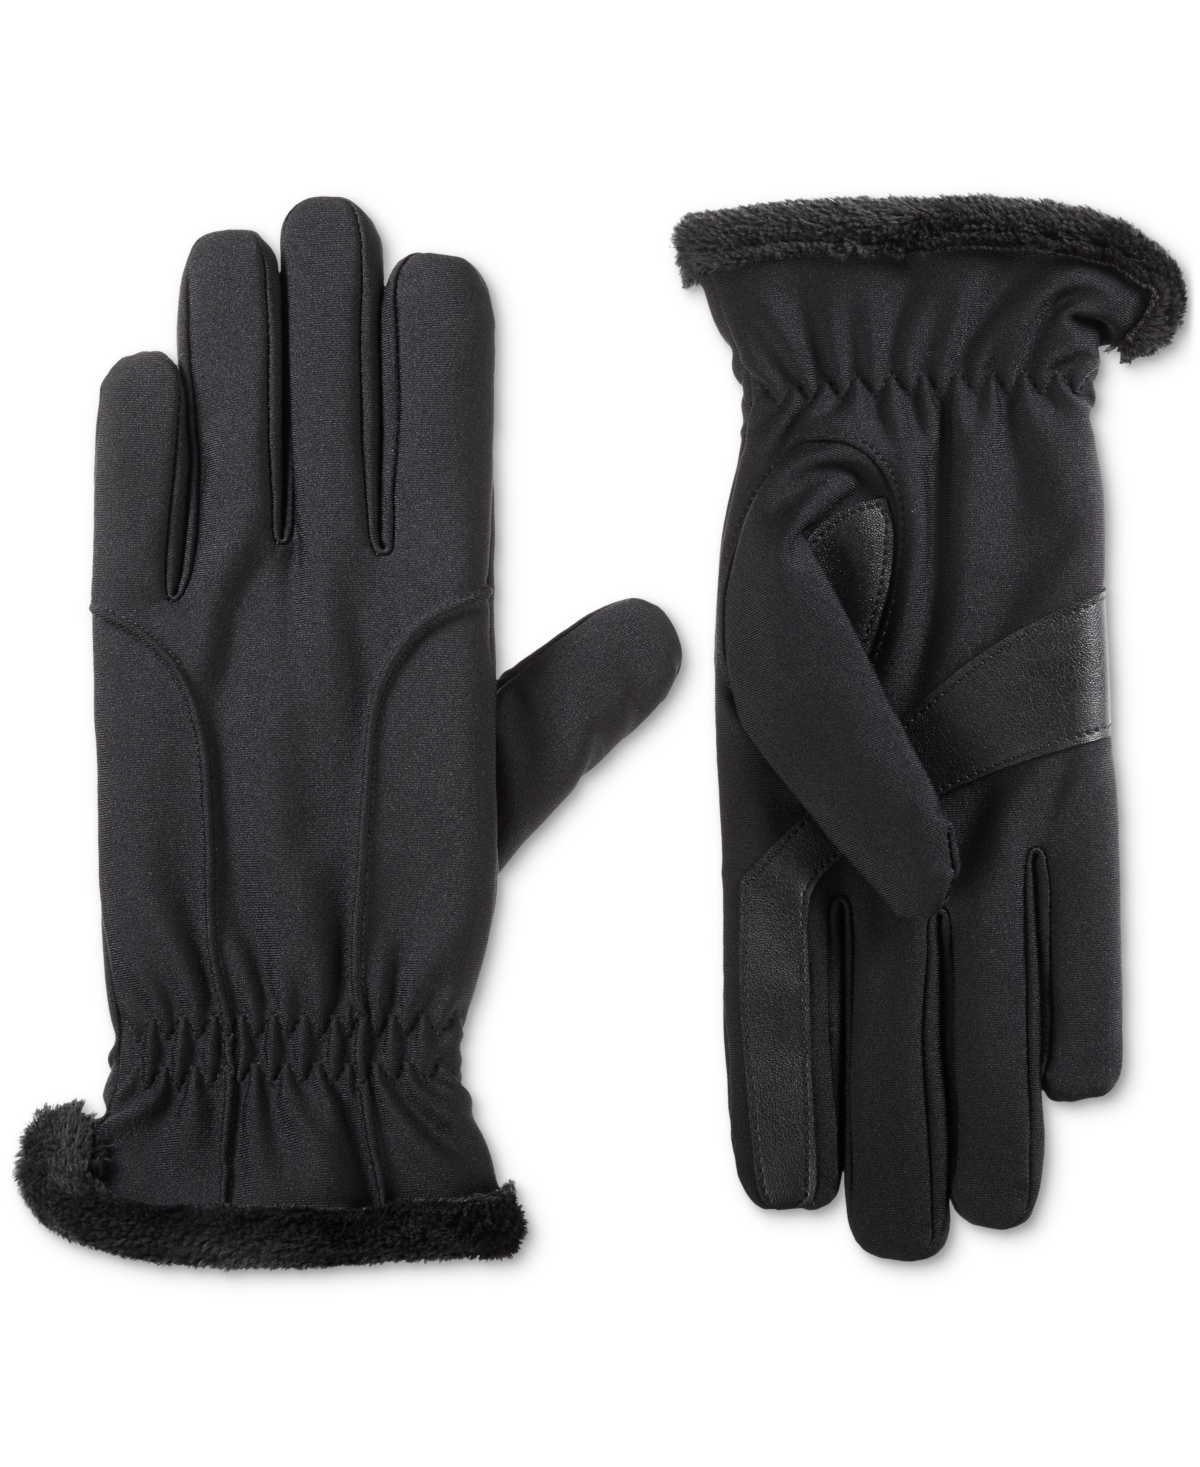 Isotoner Signature Women's Lined Water-repellent Gloves In Black